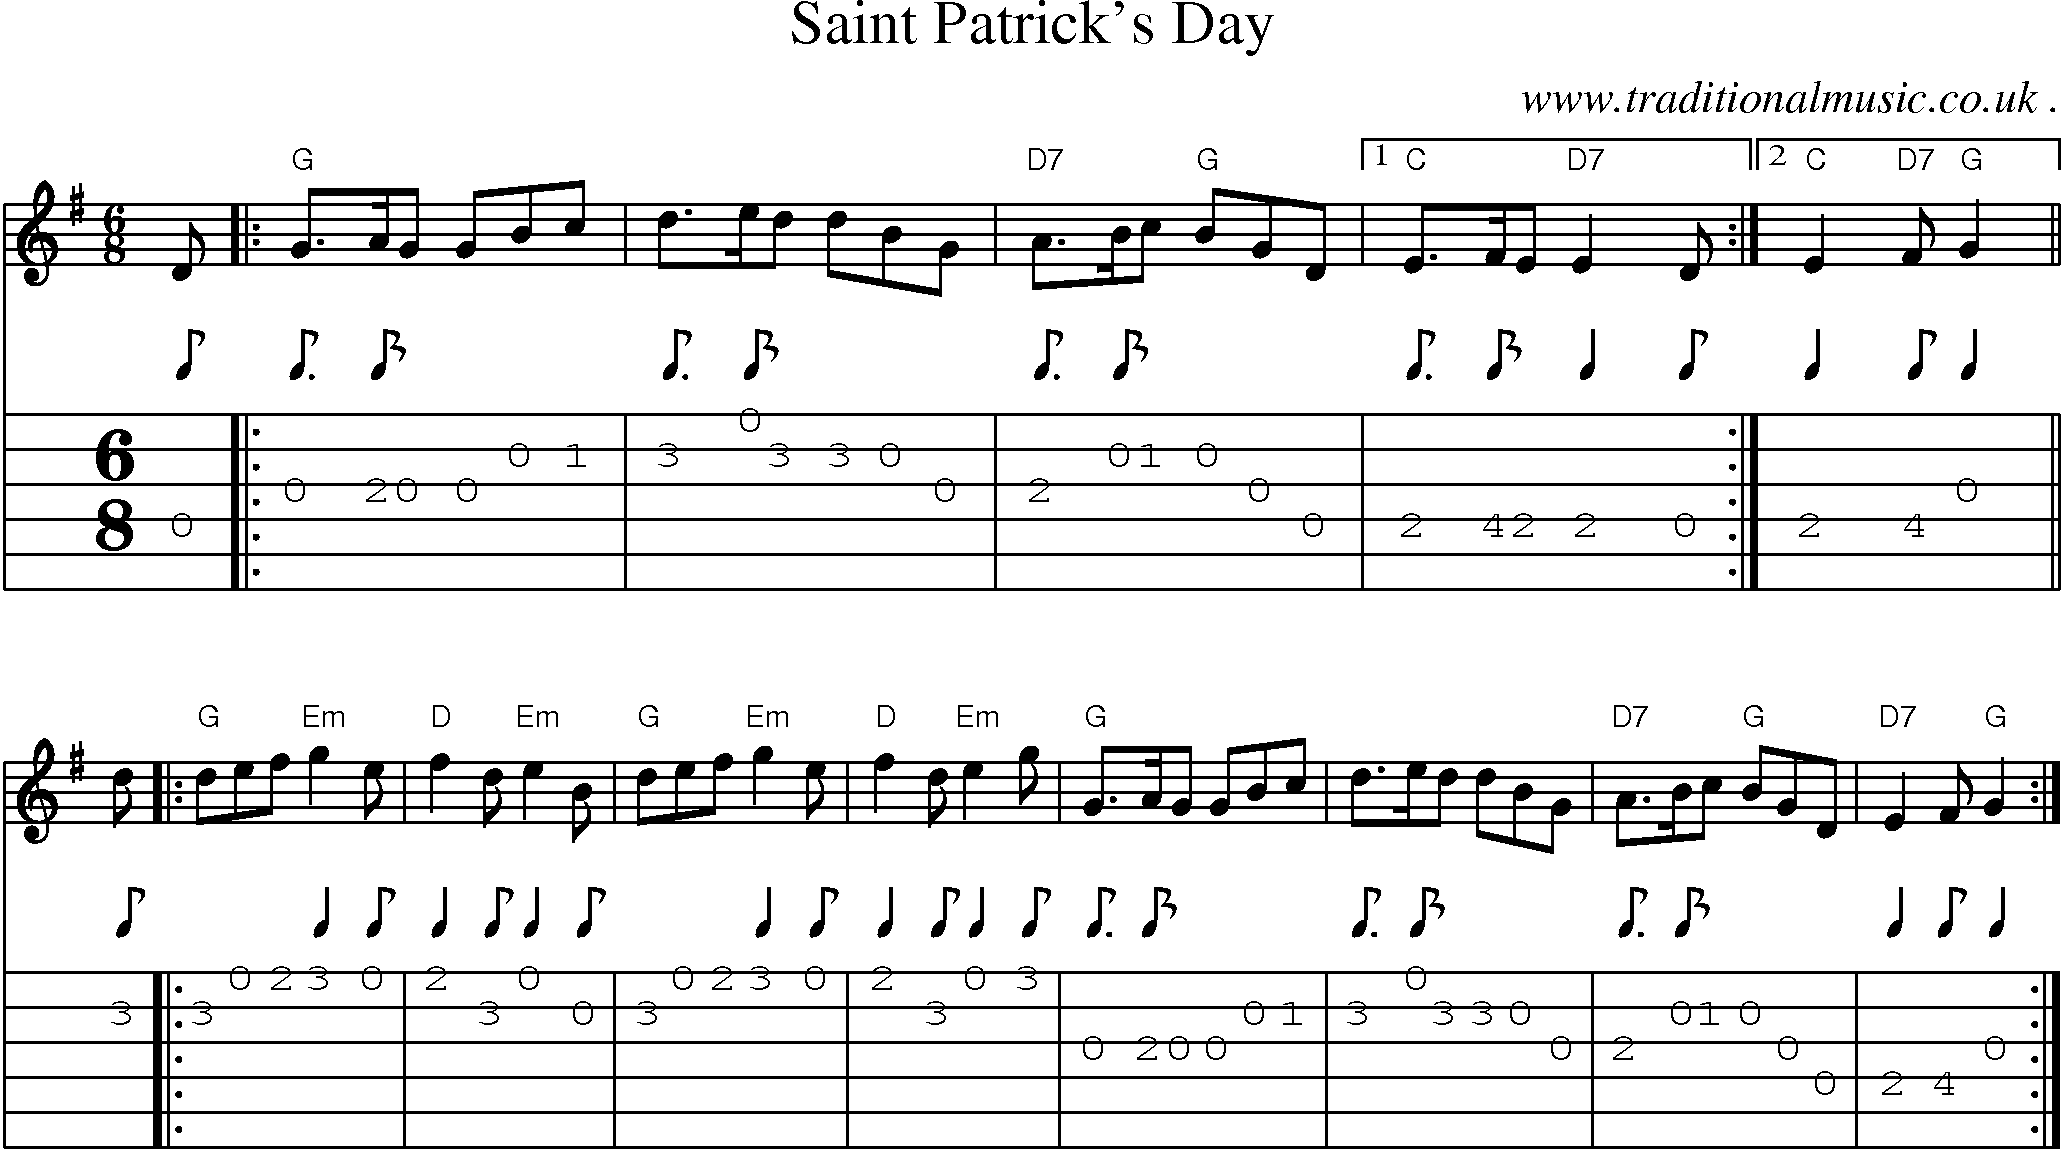 Sheet-music  score, Chords and Guitar Tabs for Saint Patricks Day